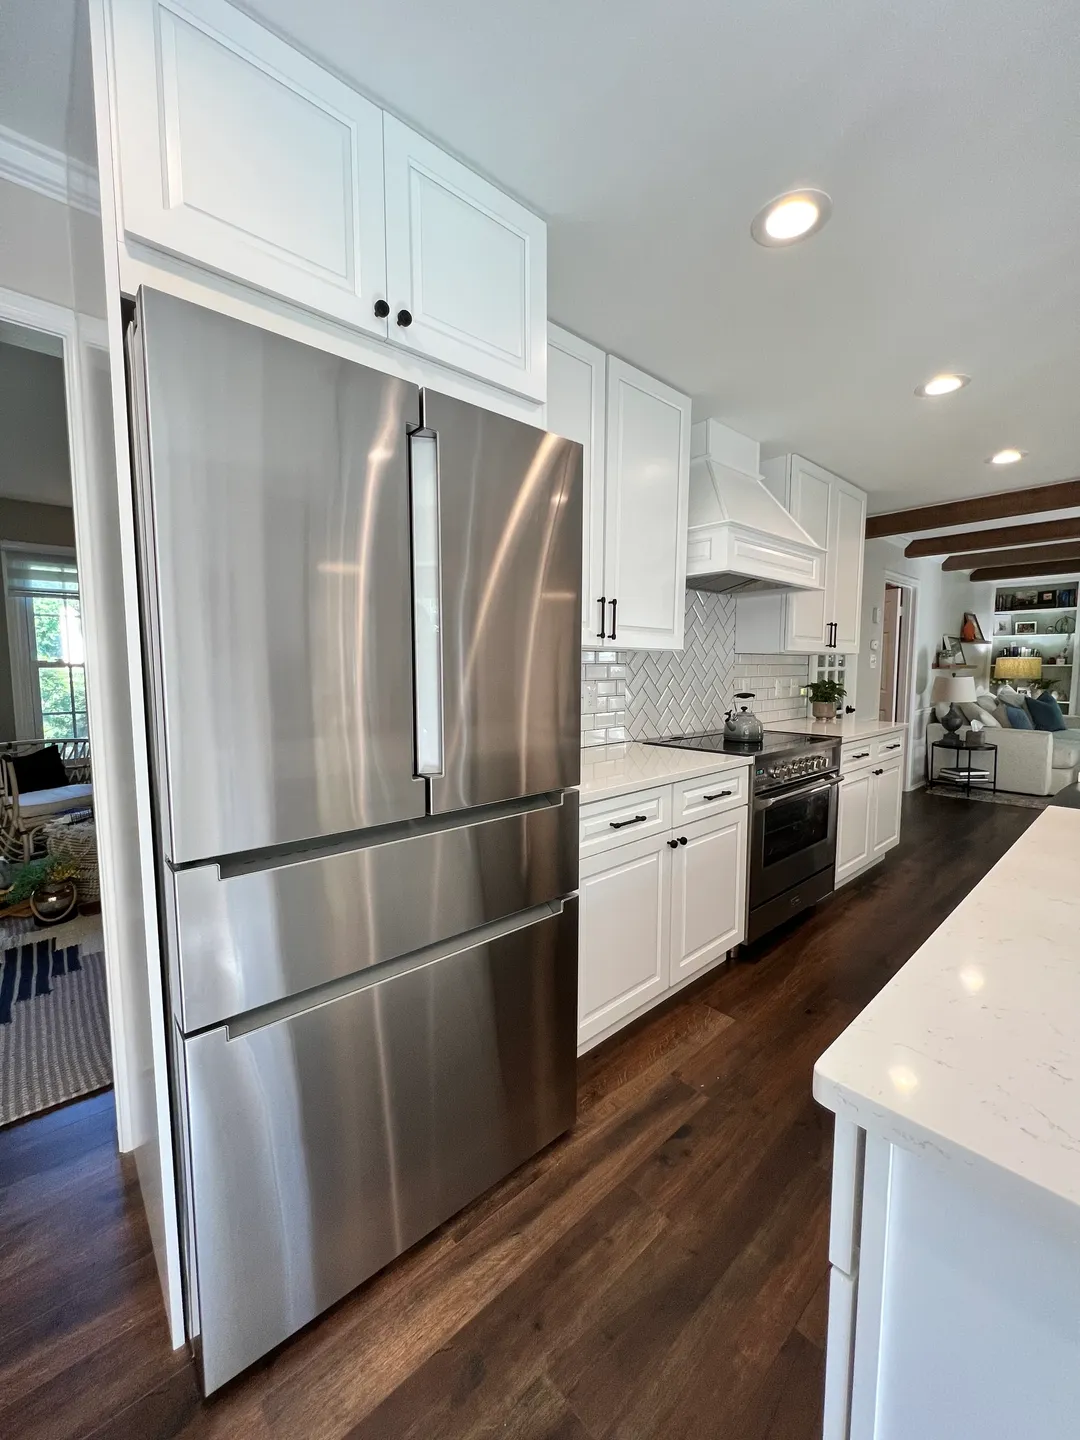 A kitchen with stainless steel appliances and white cabinets.